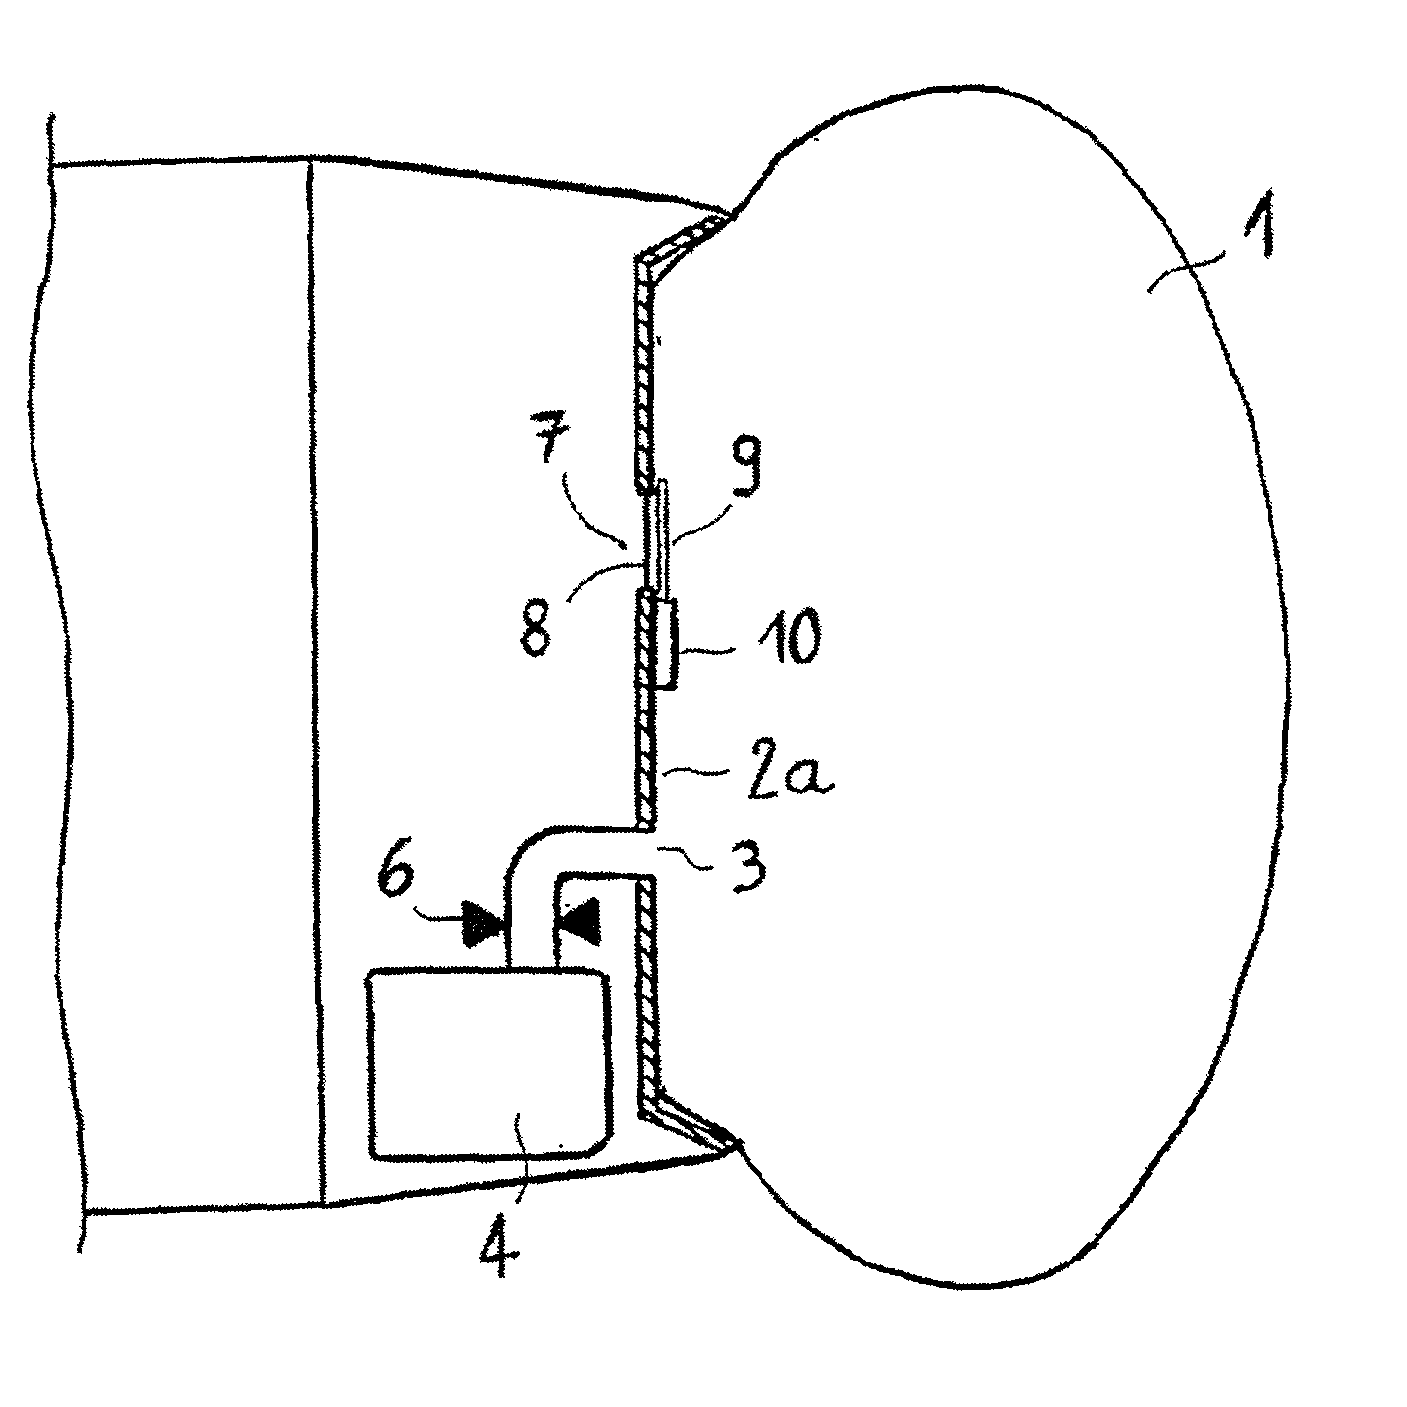 Release device for releasing an inflatable element and a protection device for providing impact protection to a vehicle fitted with such a release device